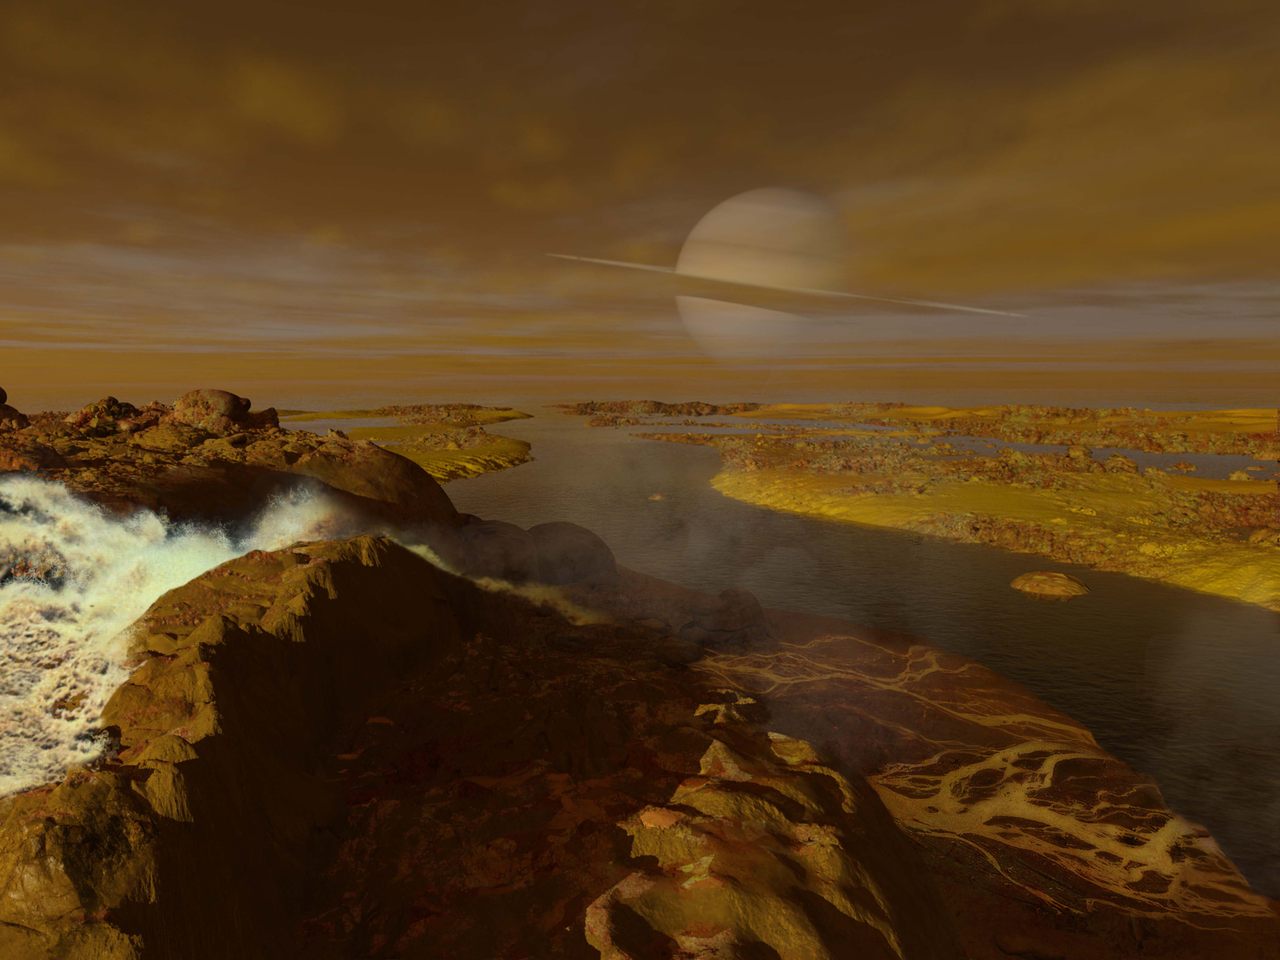 The methane river delta on Titan, one of Saturn's moons, as depicted by space artist Ron Miller.